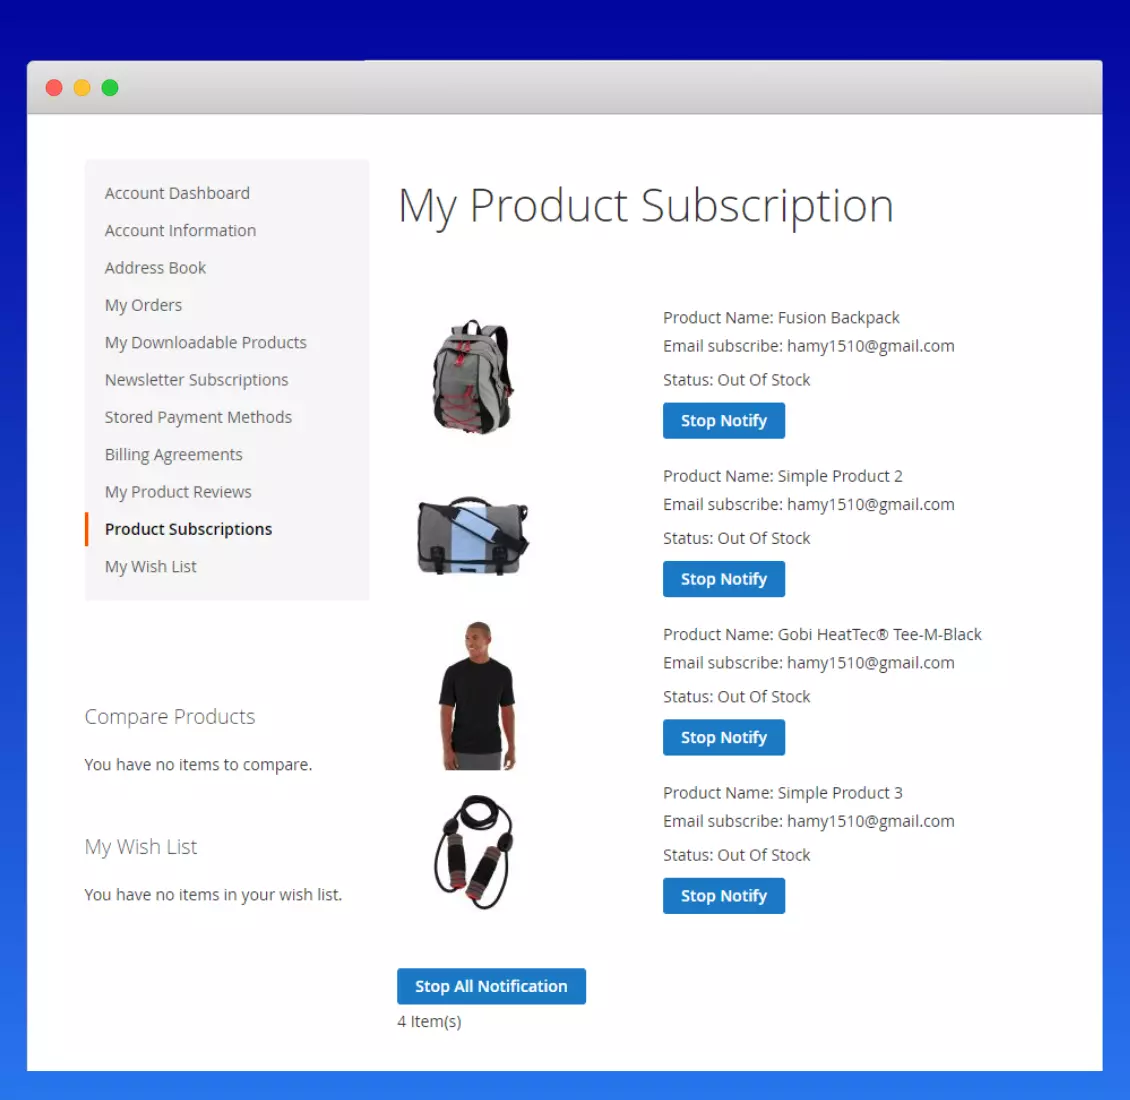  Product Subscription Tab